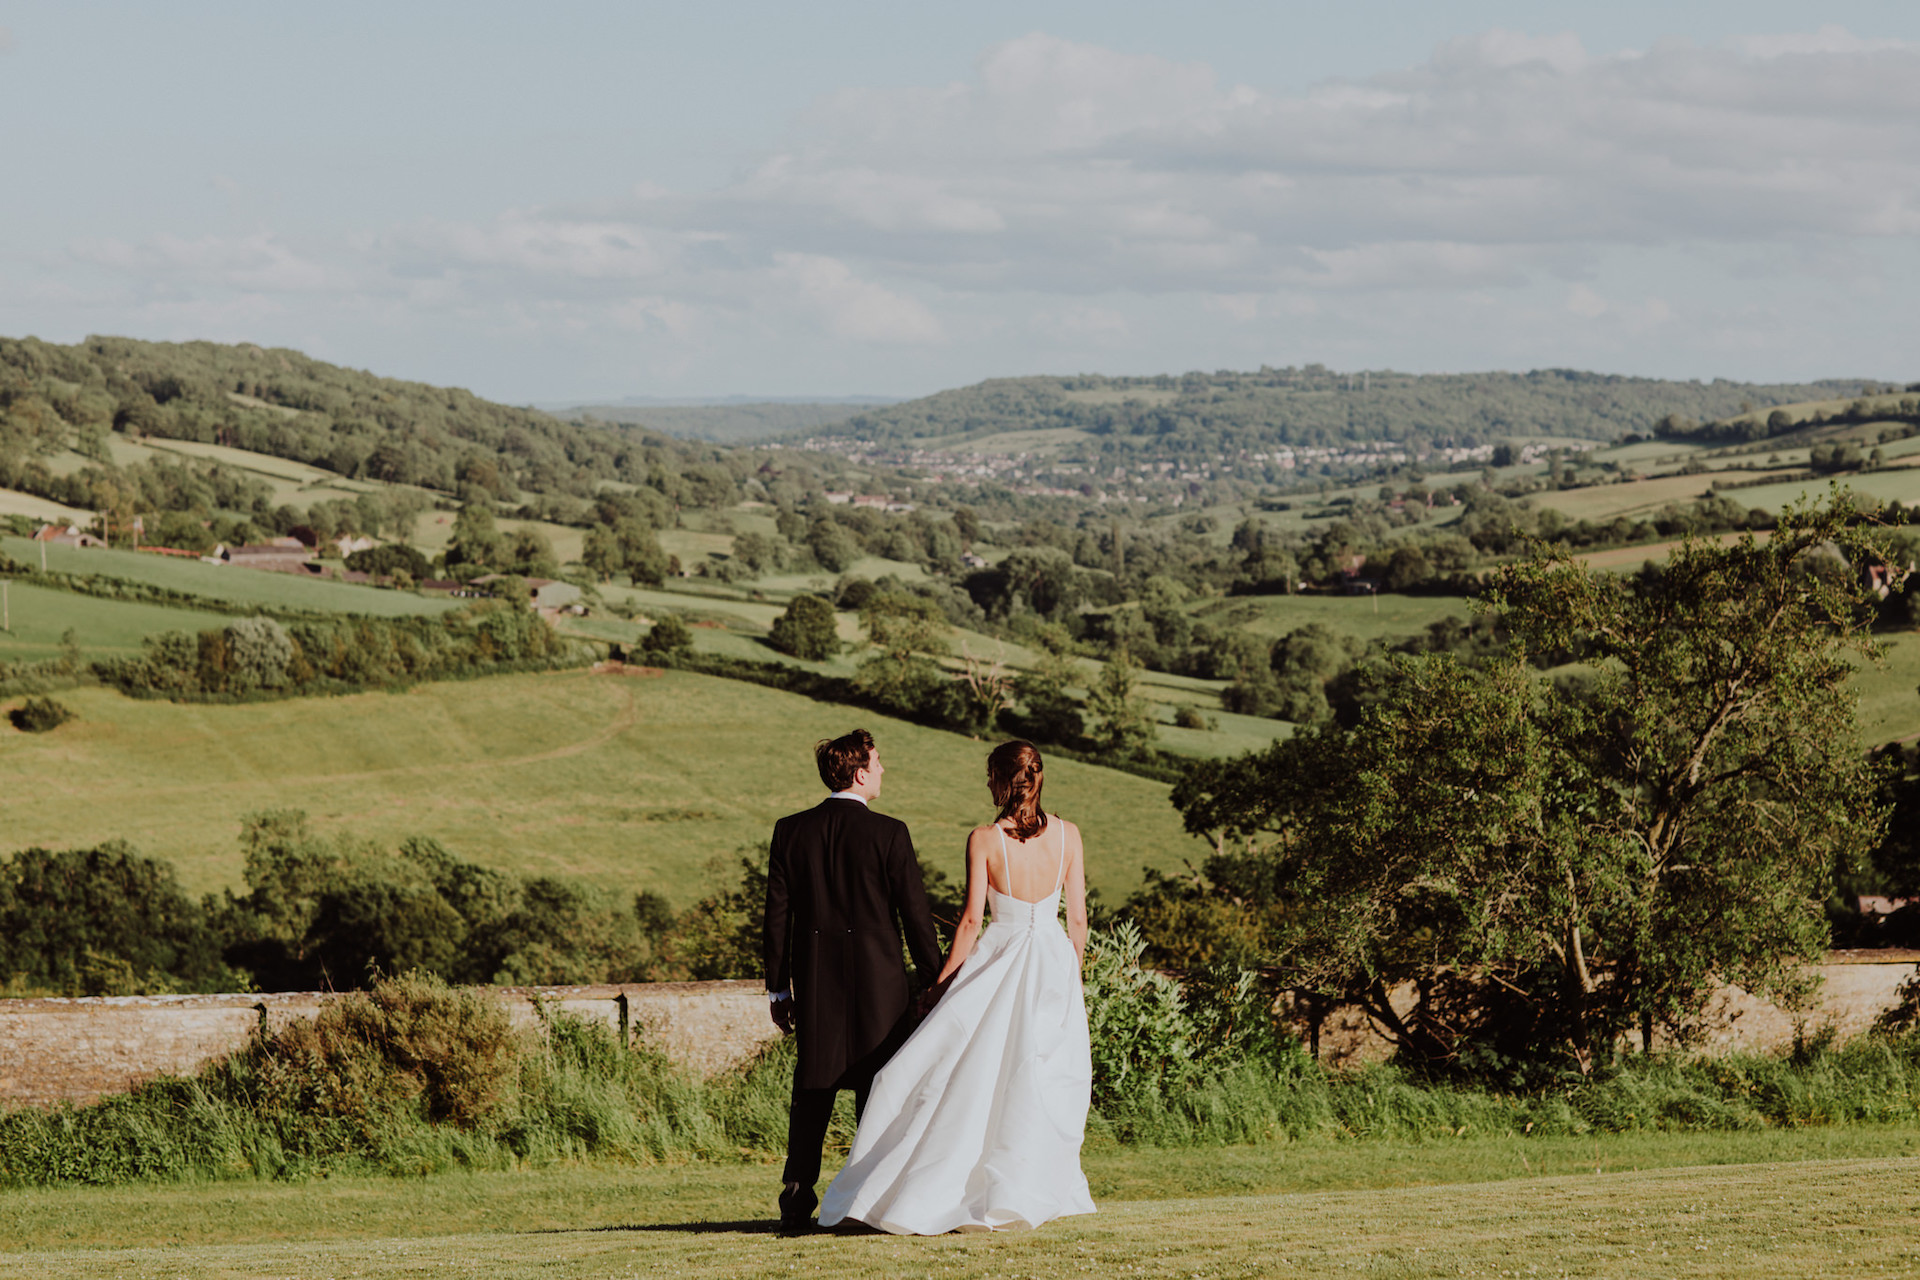 The Best Country Wedding Venues in the UK & Ireland